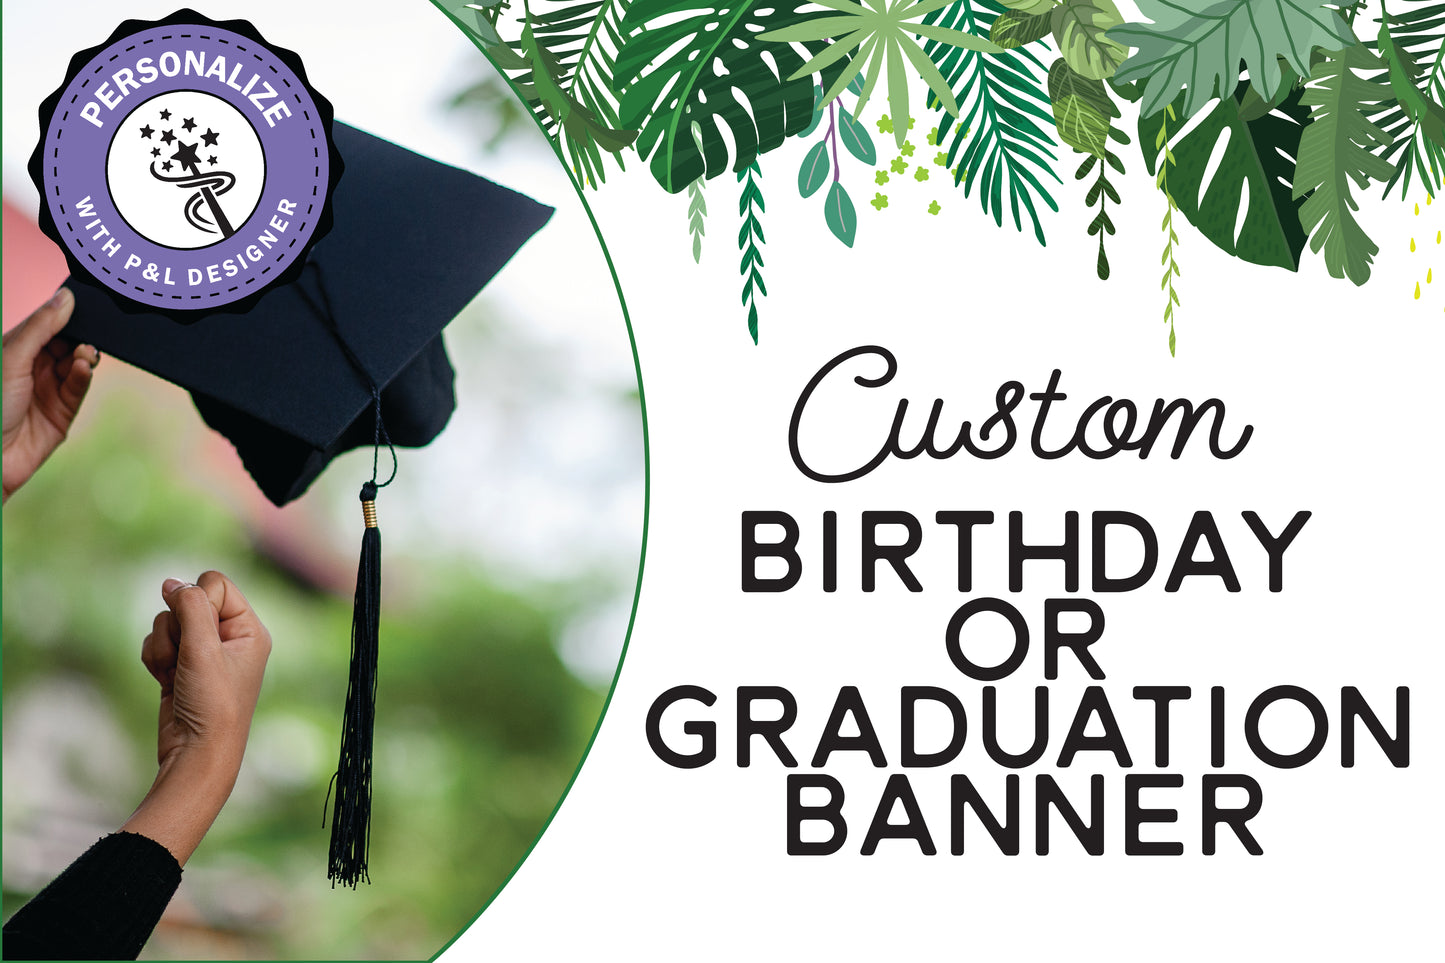 Custom Banner, 2x3 foot, customized for your special person